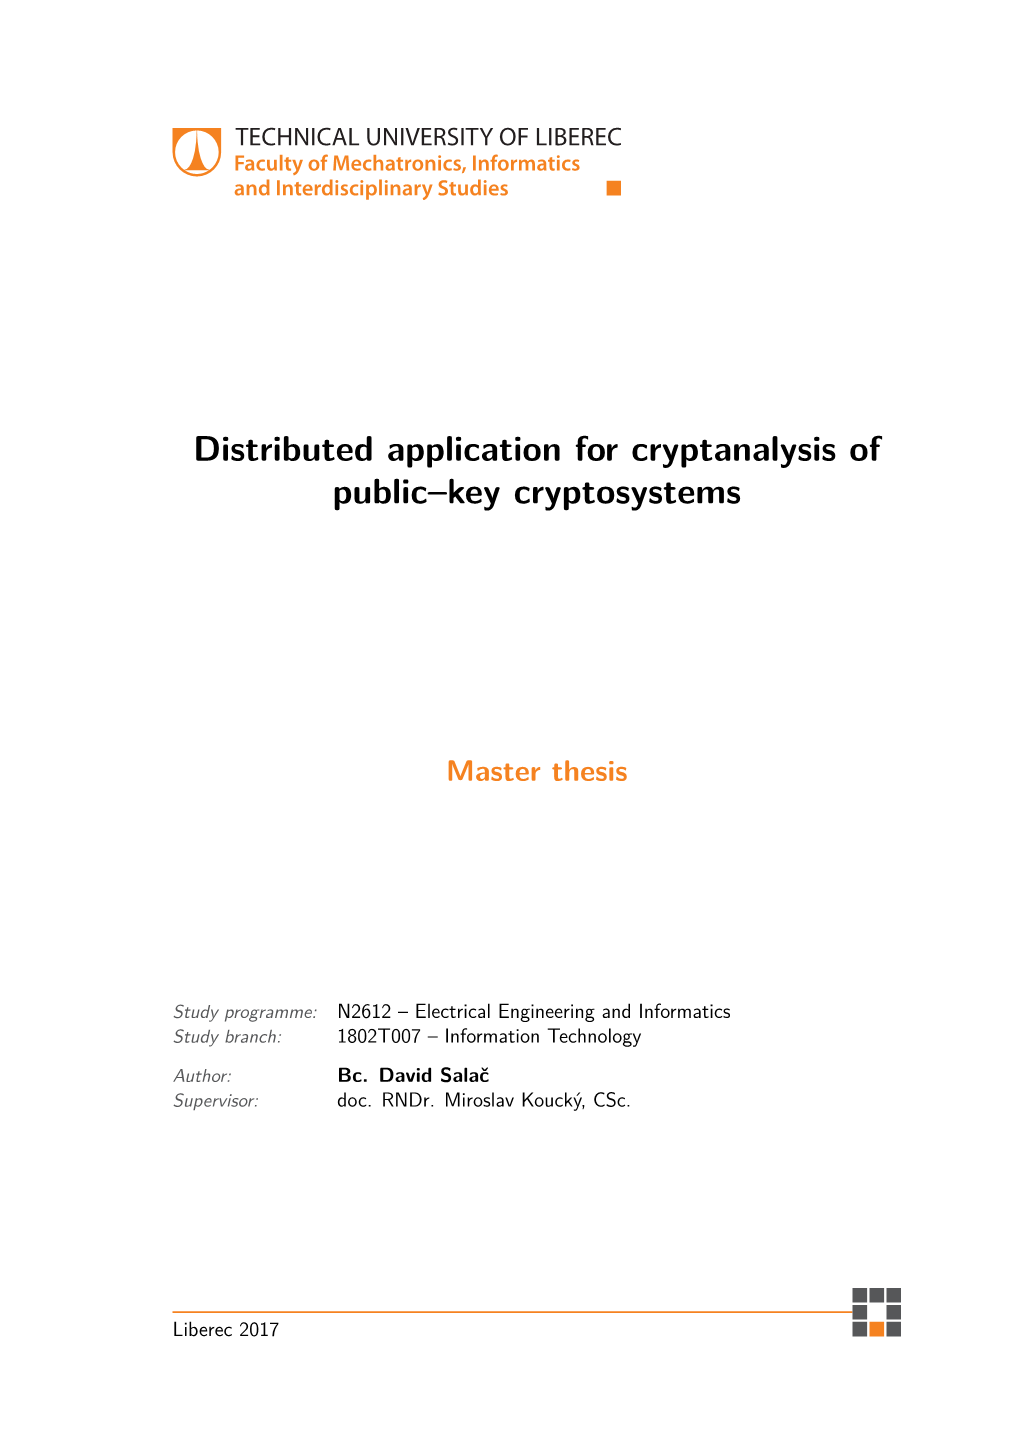 Distributed Application for Cryptanalysis of Public–Key Cryptosystems